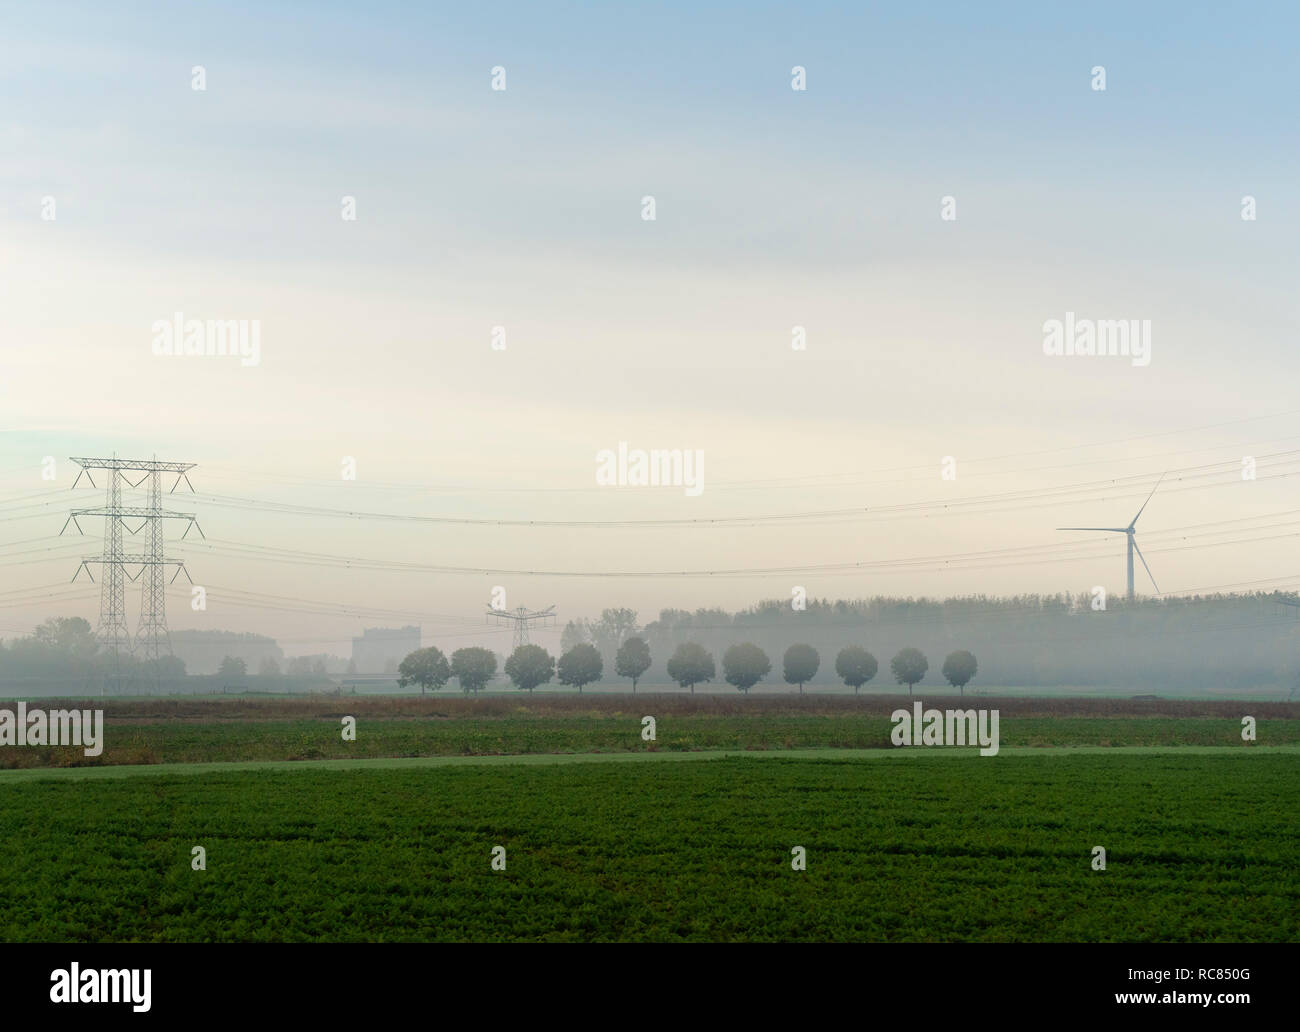 Landscape with wind turbine and power lines on a foggy morning, Netherlands Stock Photo